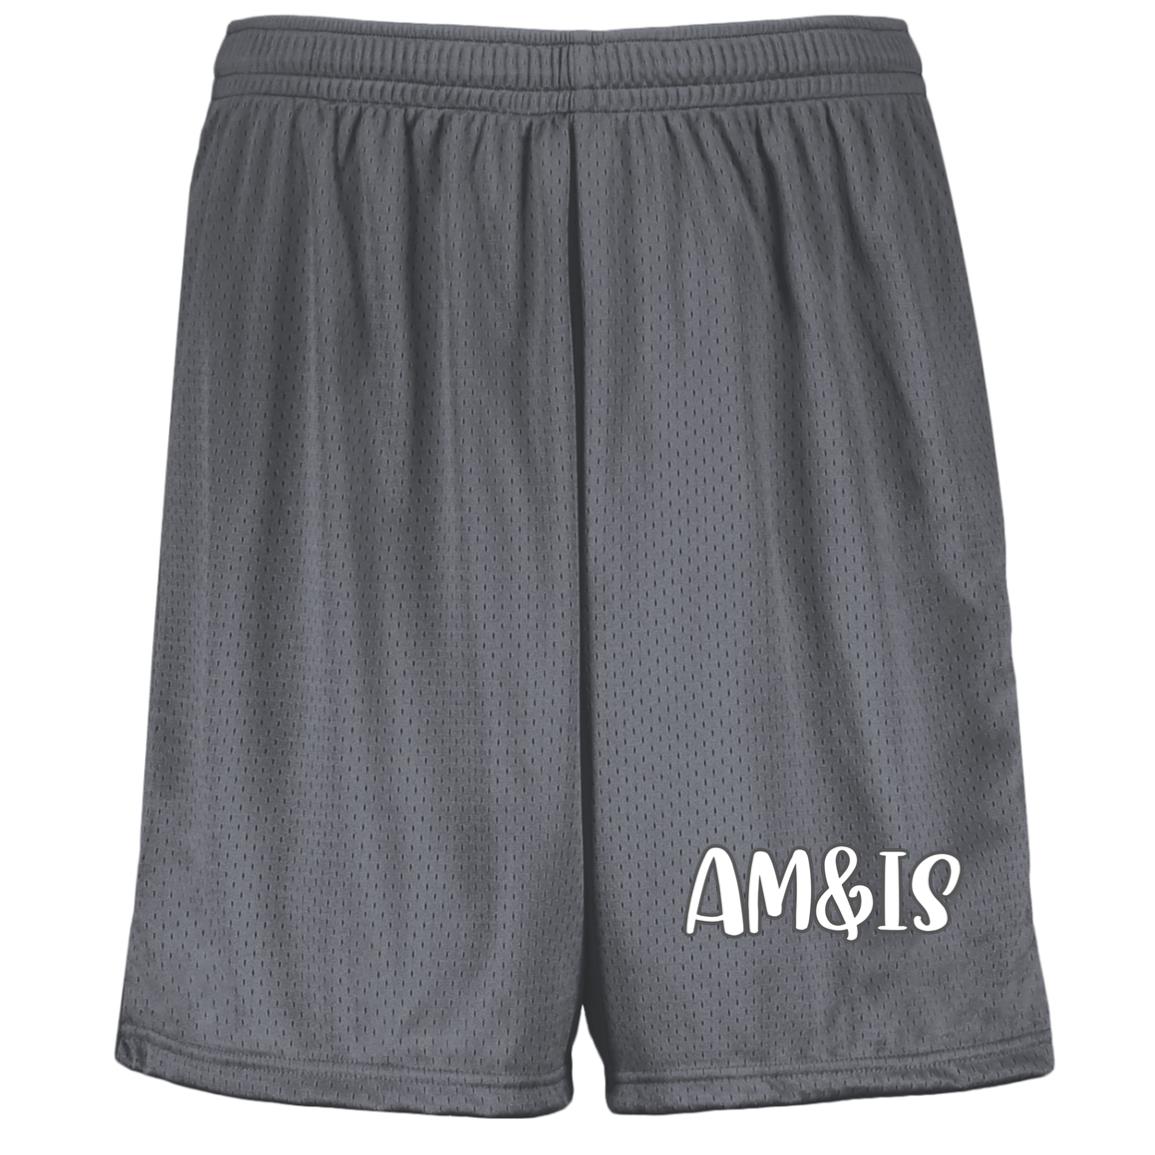 GRAPHITE - AM&IS Activewear Youth Moisture-Wicking Mesh Shorts - kids shorts at TFC&H Co.